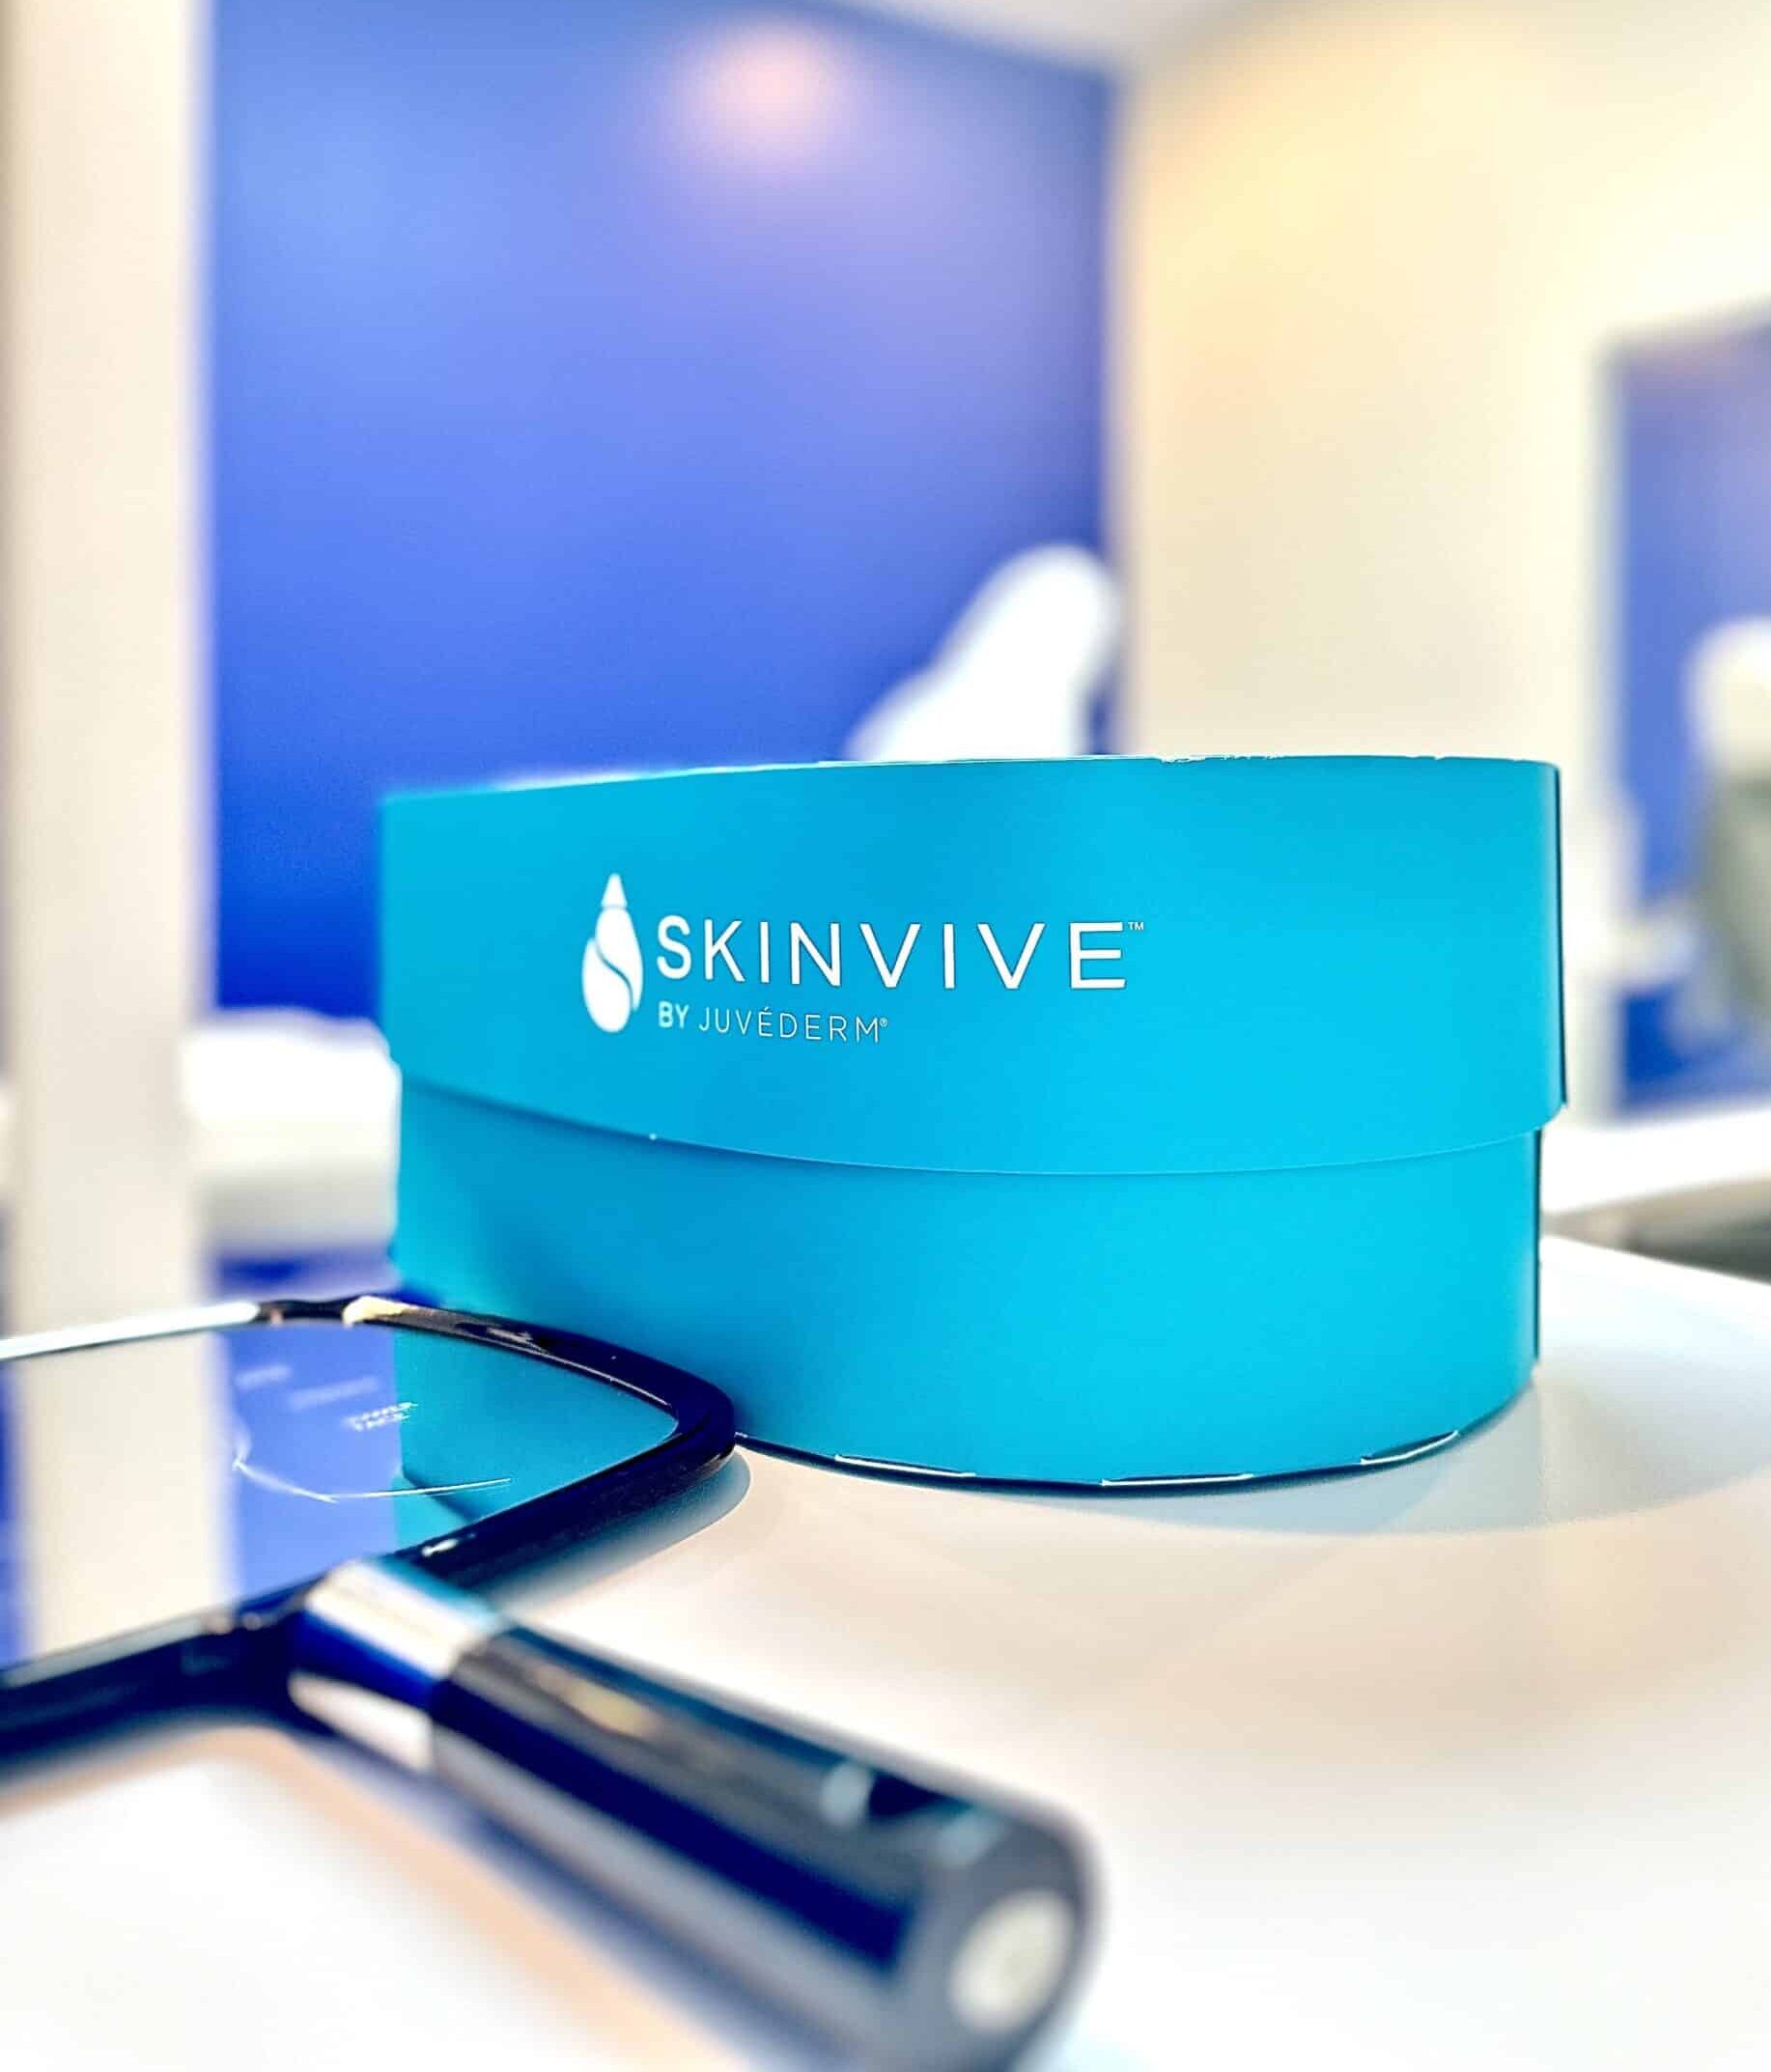 Skinvive by Juvederm is available at Blue Medical Spa in Sherman Oaks.